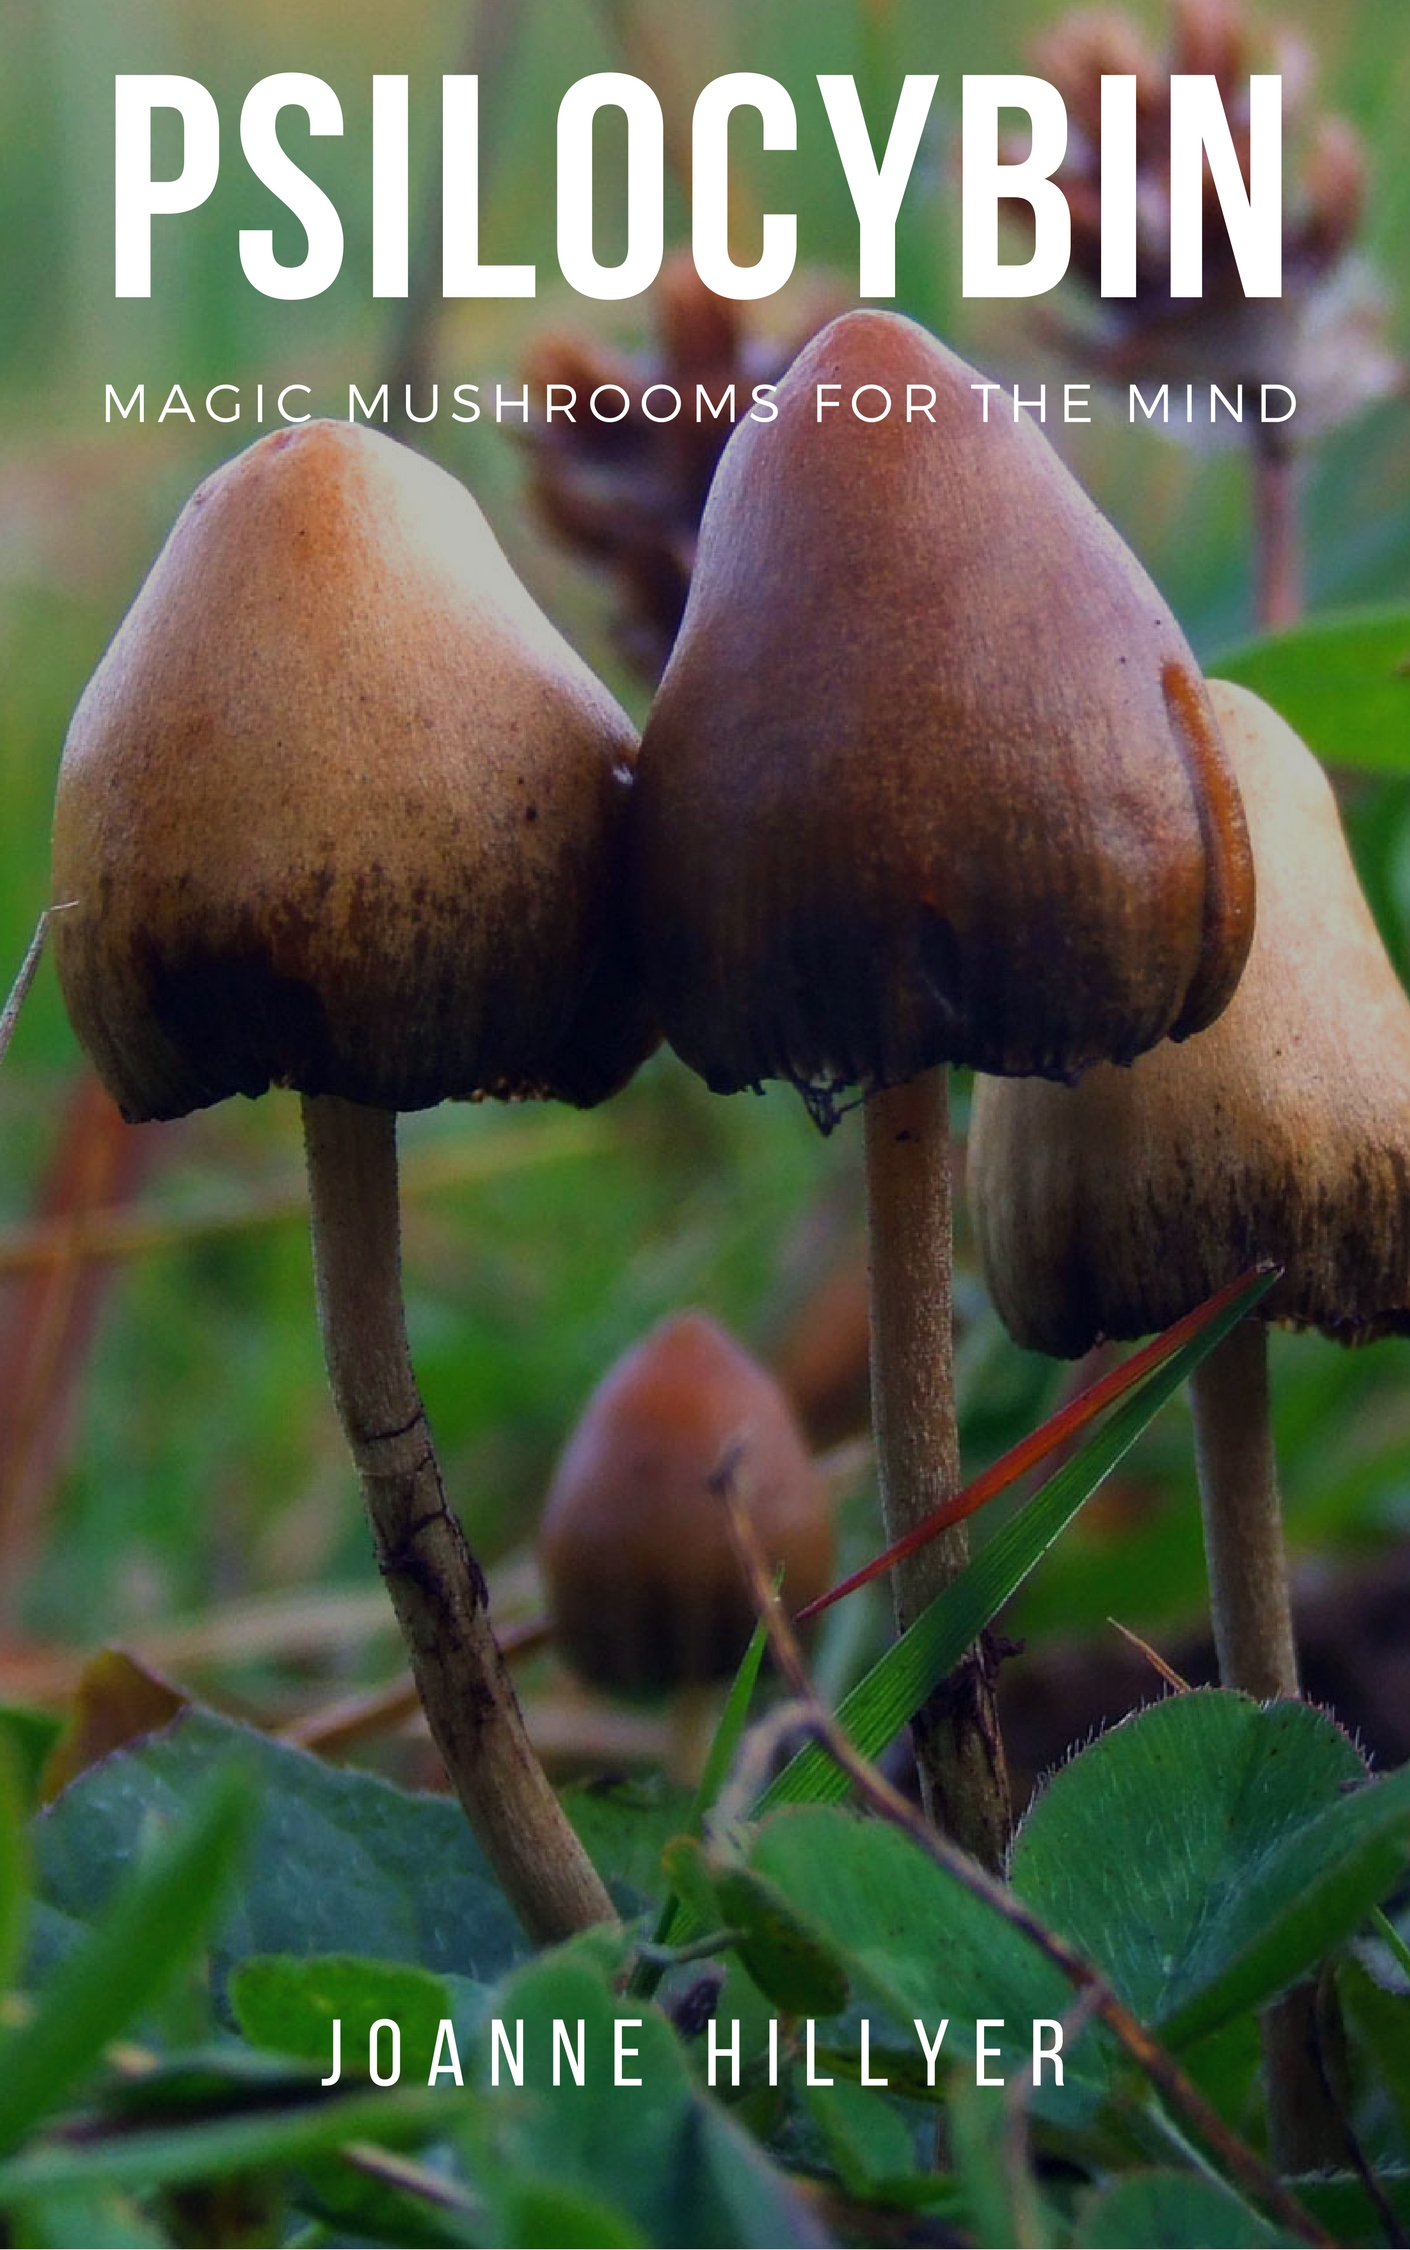 FREE: Psilocybin: Magic Mushrooms for the Mind by Joanne Hillyer